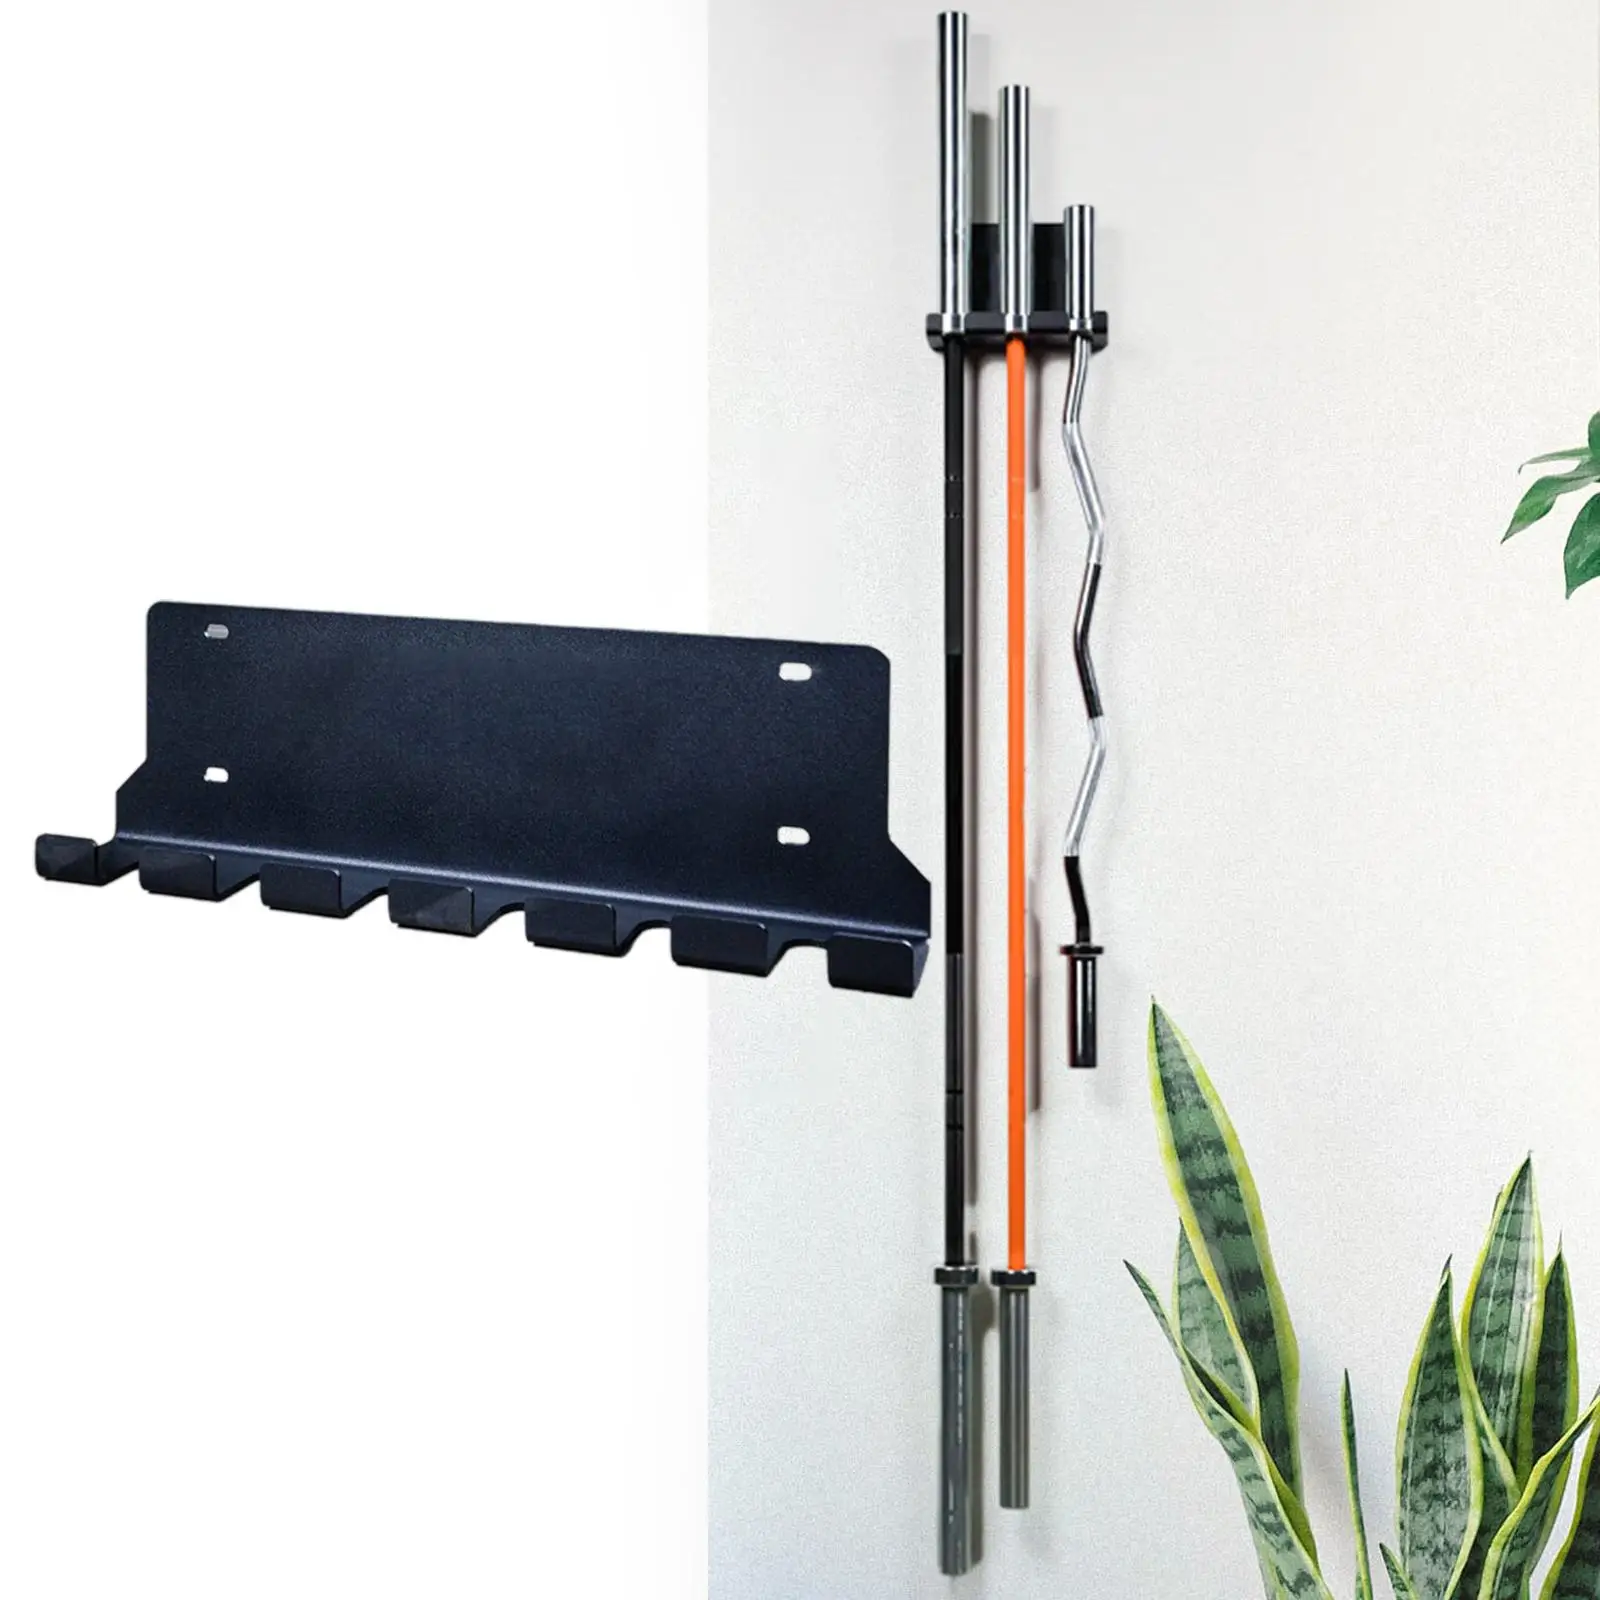 Barbell Storage Holder Rack Display Wall Mount Wall Hanger for Workout Equipment